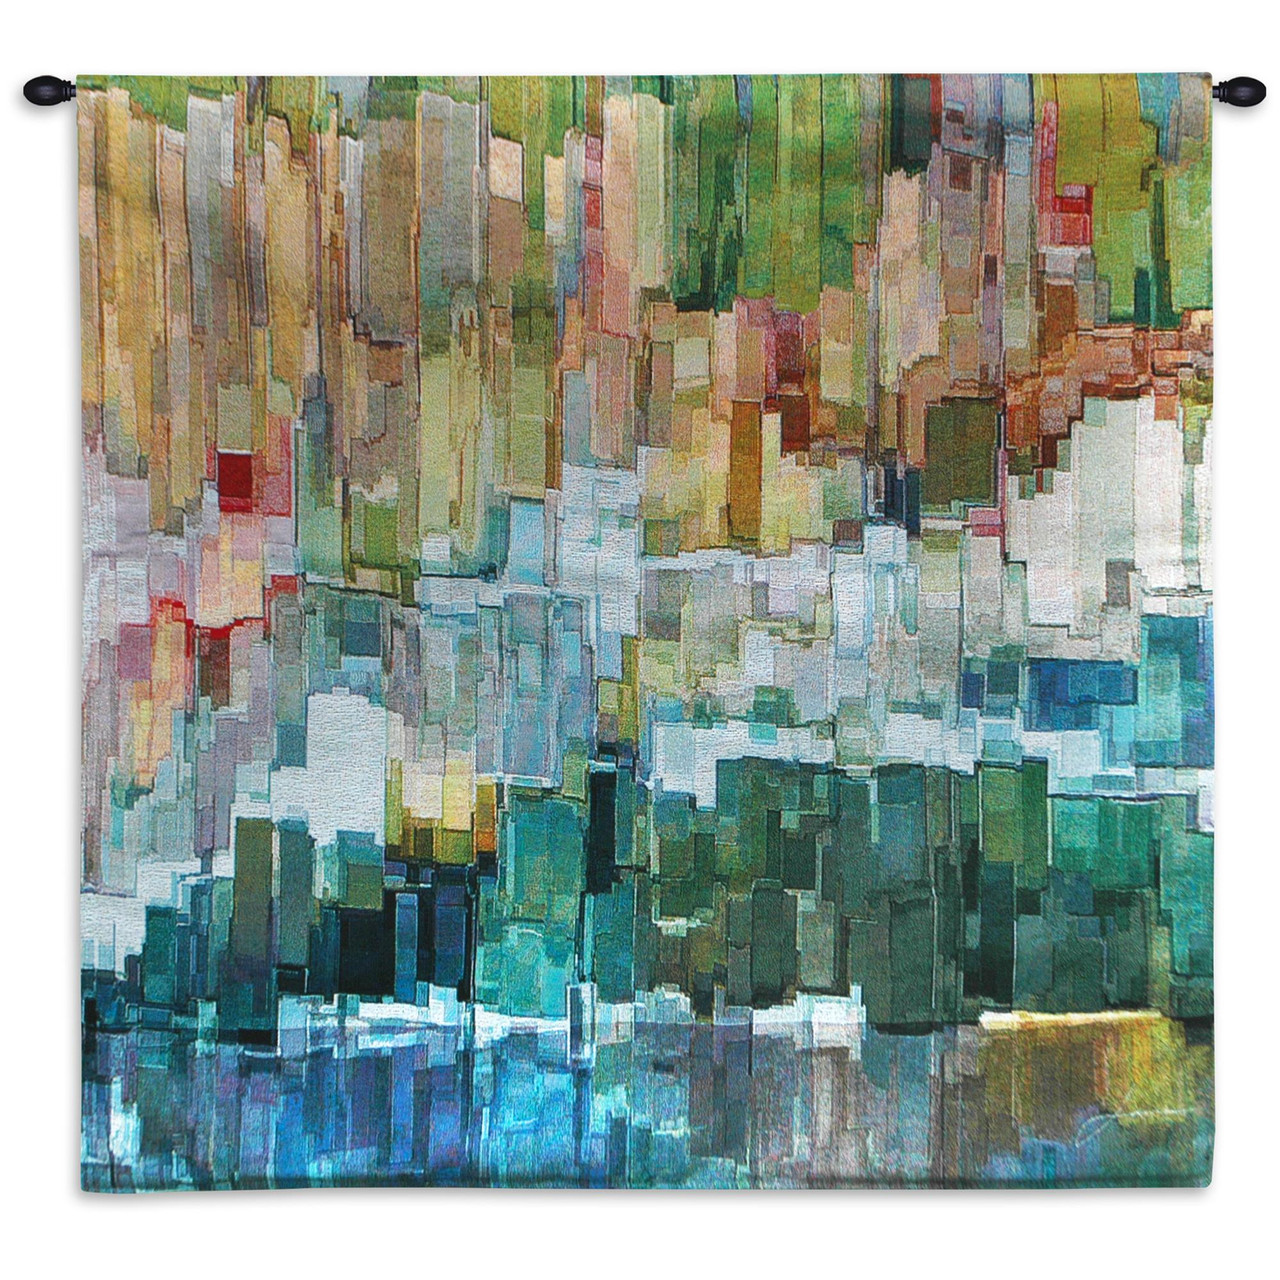 Glacier Bay III by James Burghardt Woven Tapestry Wall Art Hanging Mixed  Color Composition Abstract 100% Cotton USA Size 53x53